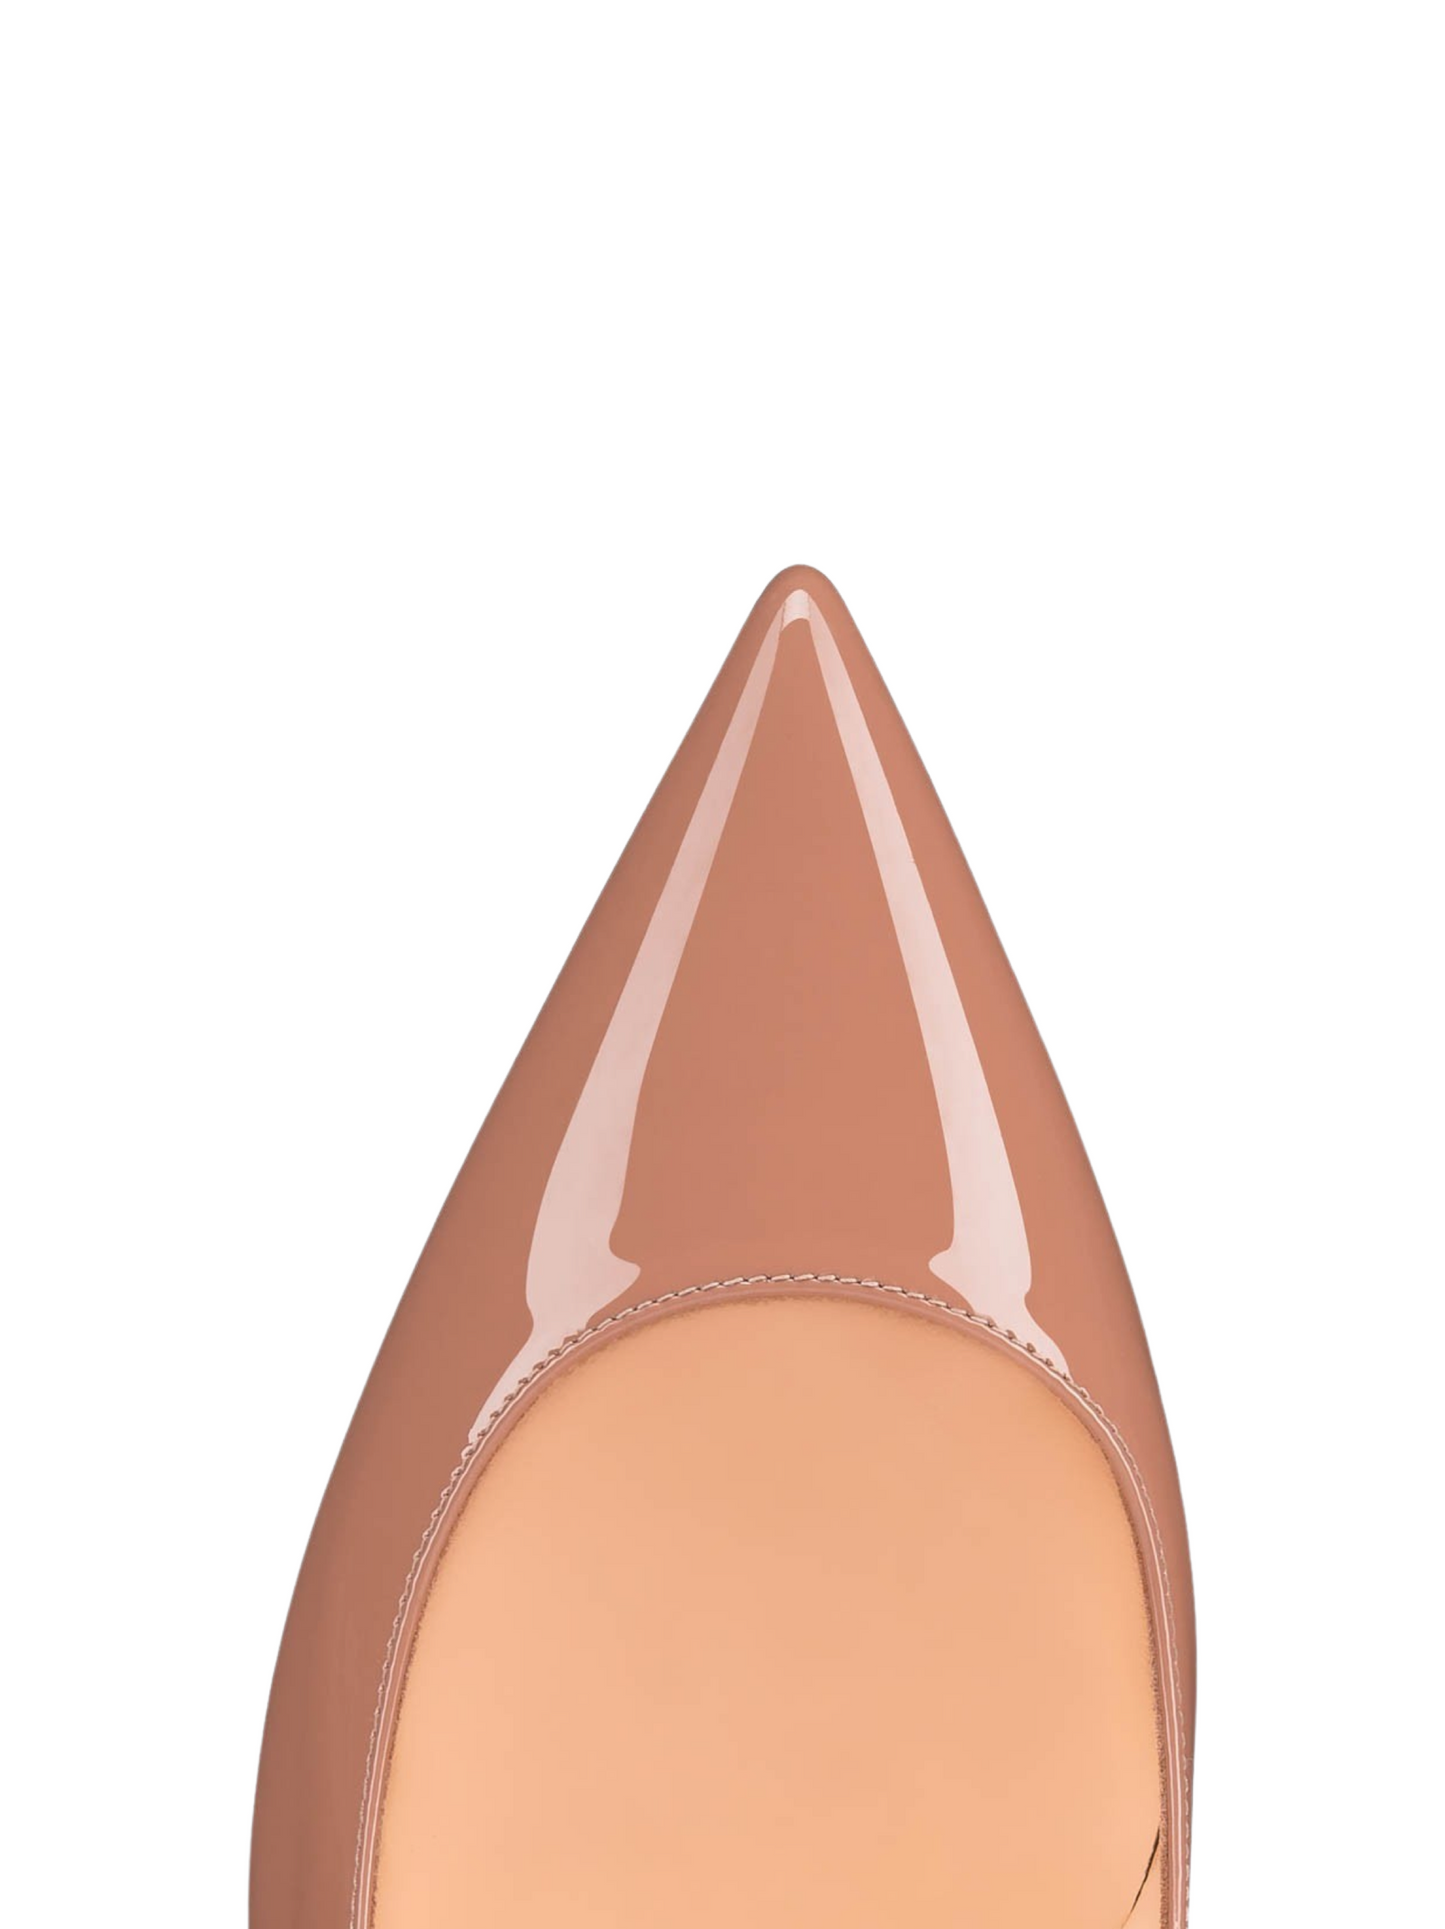 Christian Louboutin Kate 85 Patent Heel in Blush  | In-Store Only